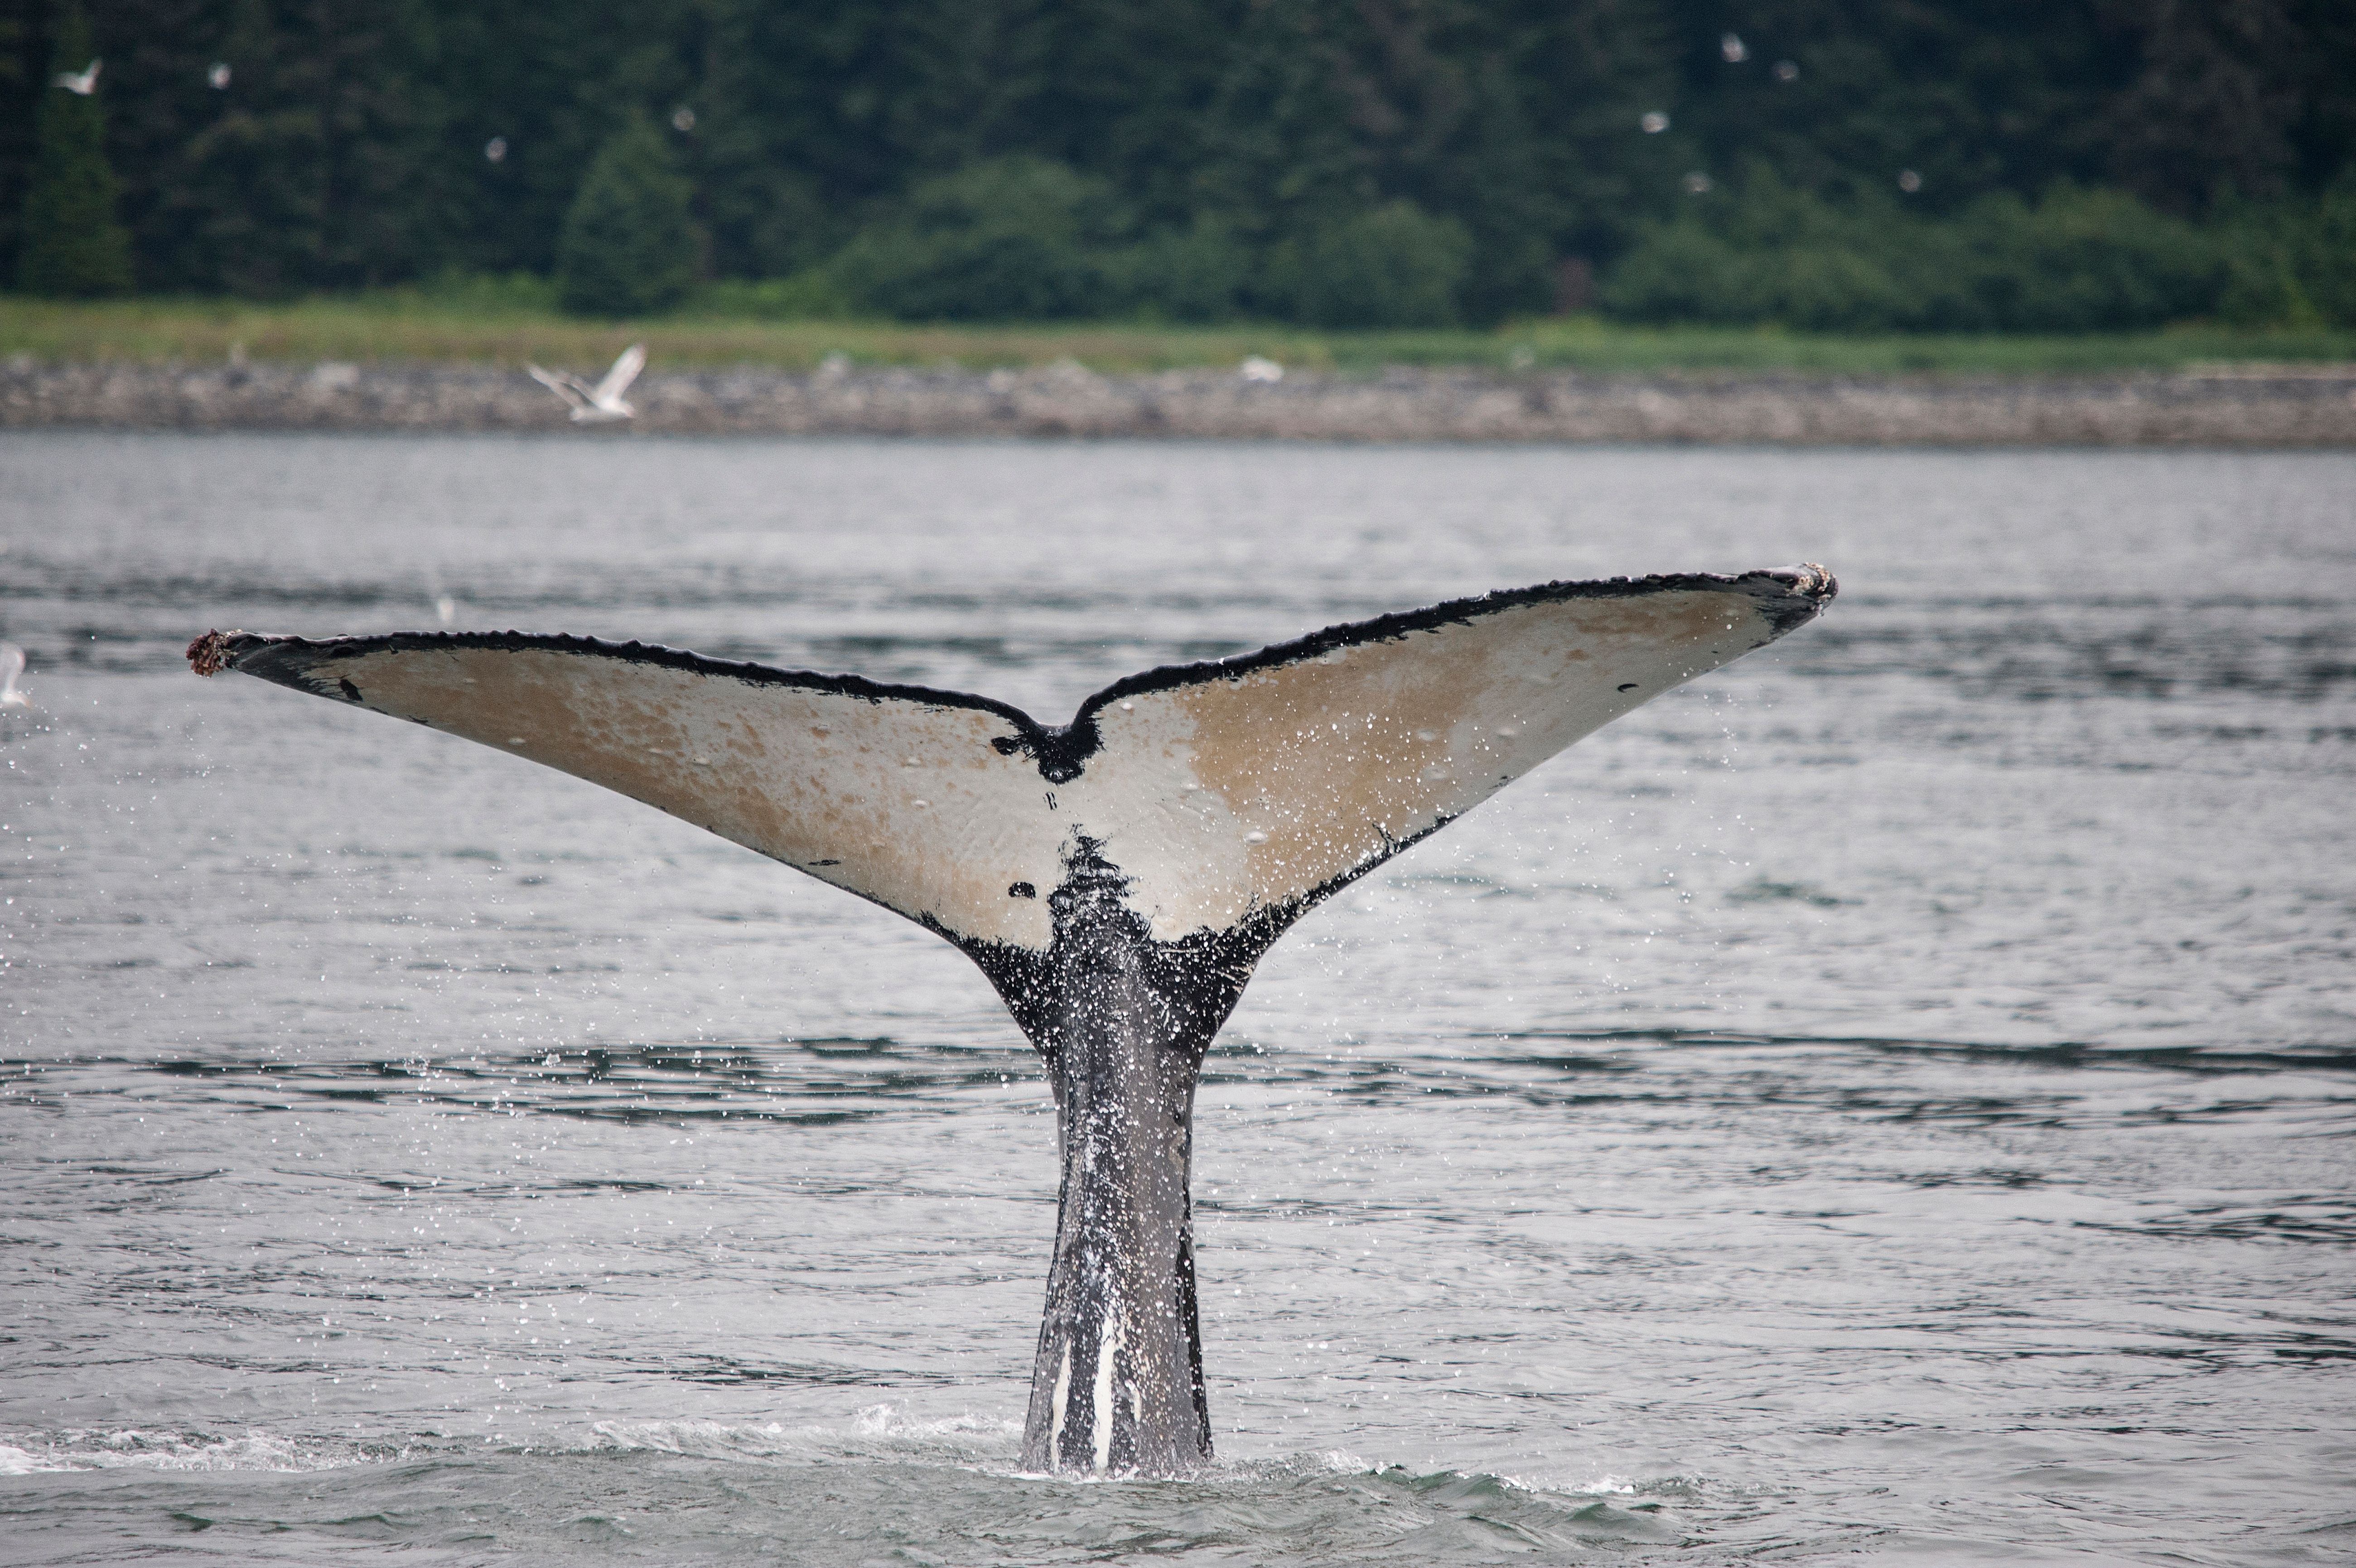 Humpback whale tail emerging from the water in Alaska, a popular activity during Alaskan cruises.